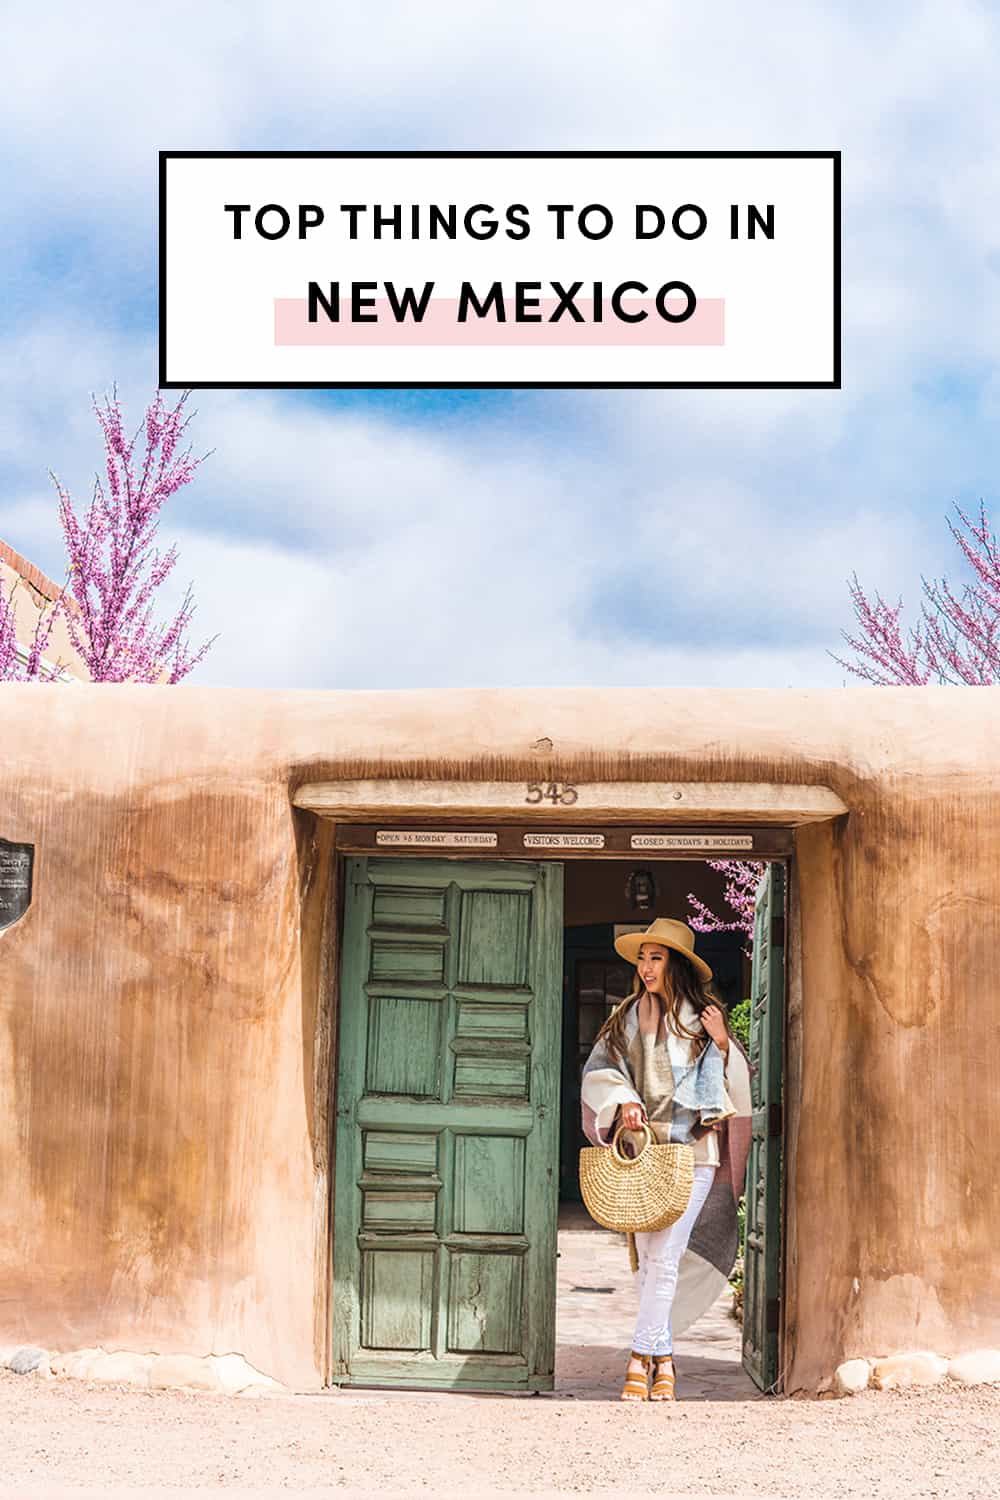 Top Things To Do In New Mexico